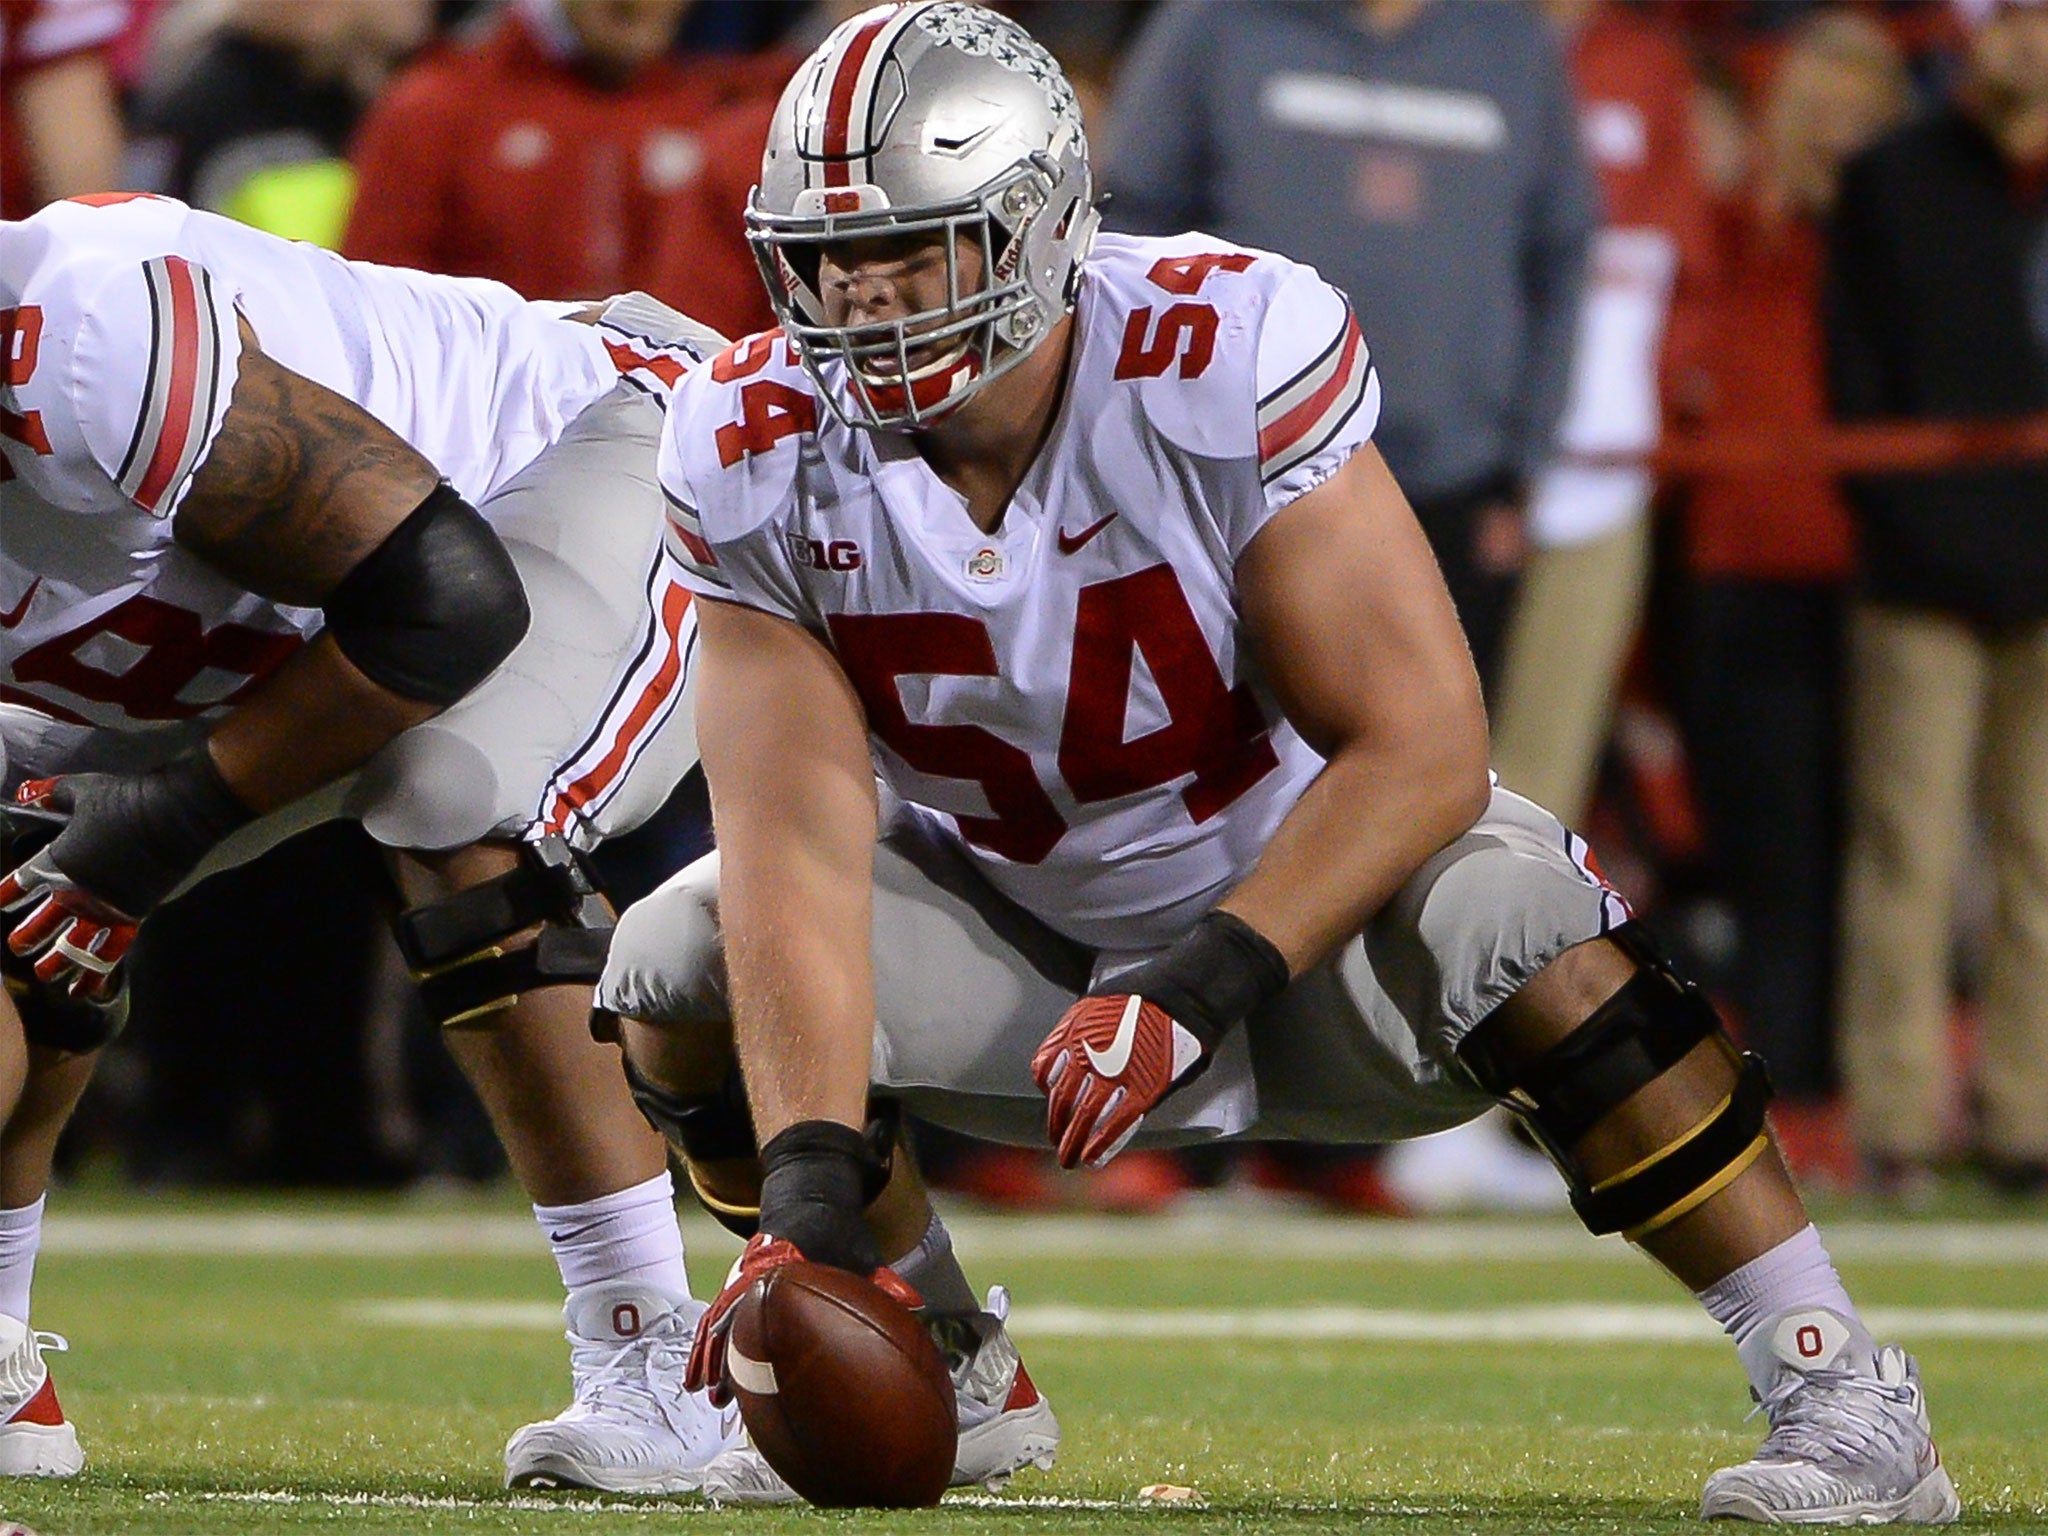 Billy Price is one of the best offensive linemen in the draft